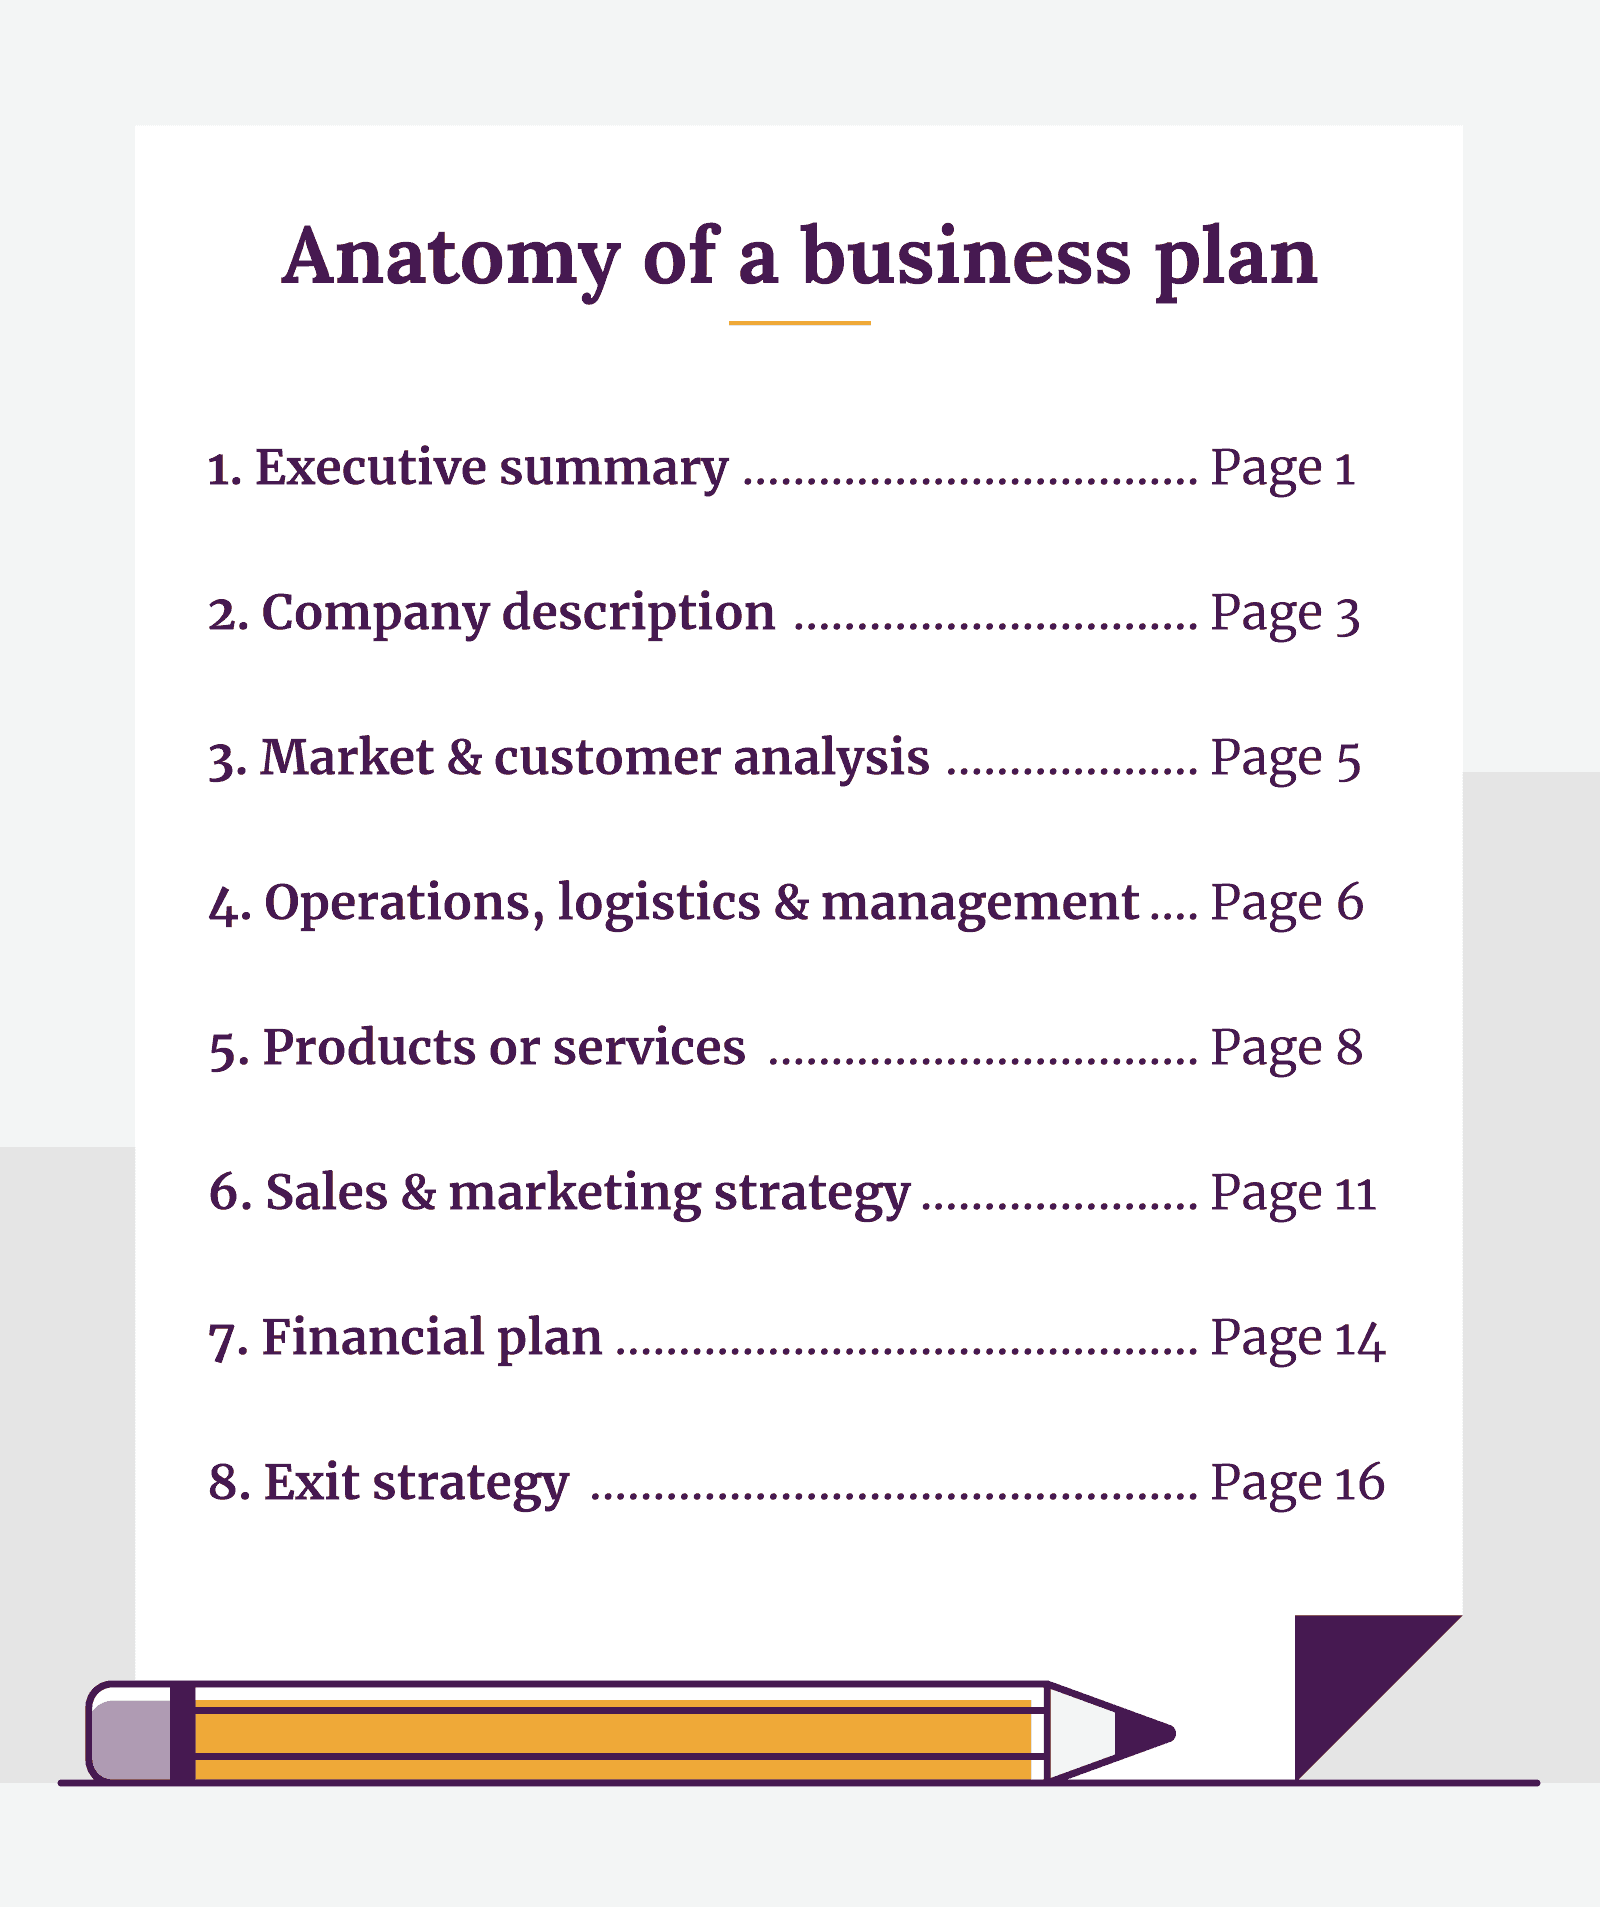 Anatomy of a business plan